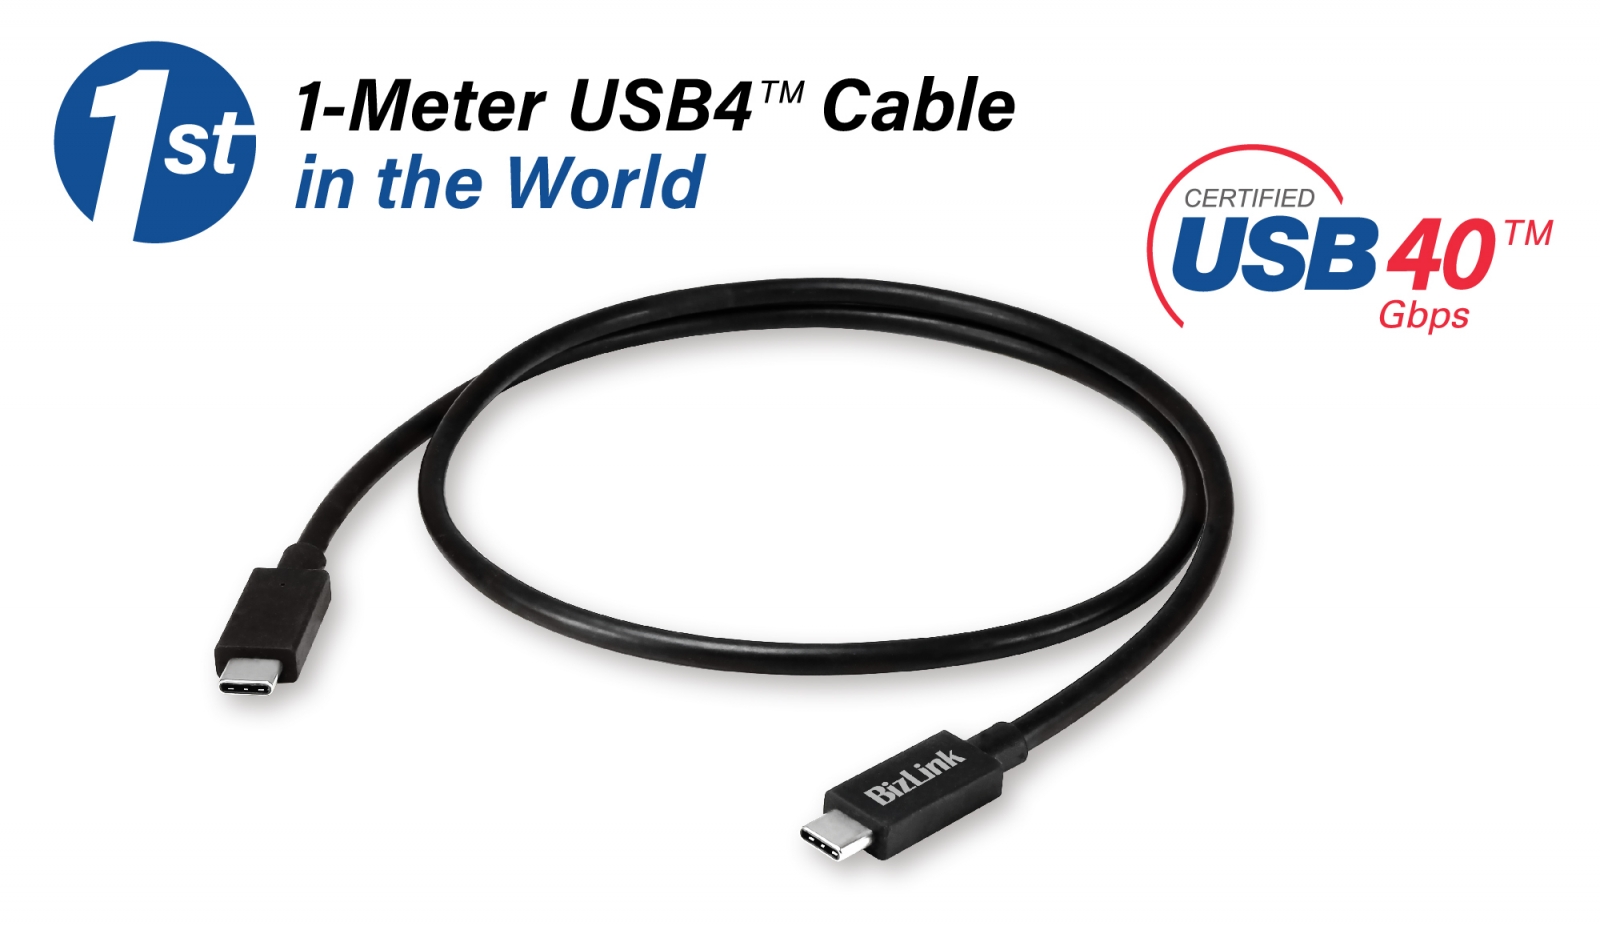 Hals debat rulle BizLink Launches the First 1-Meter USB4™ Gen 3 Type-C Cable in the World